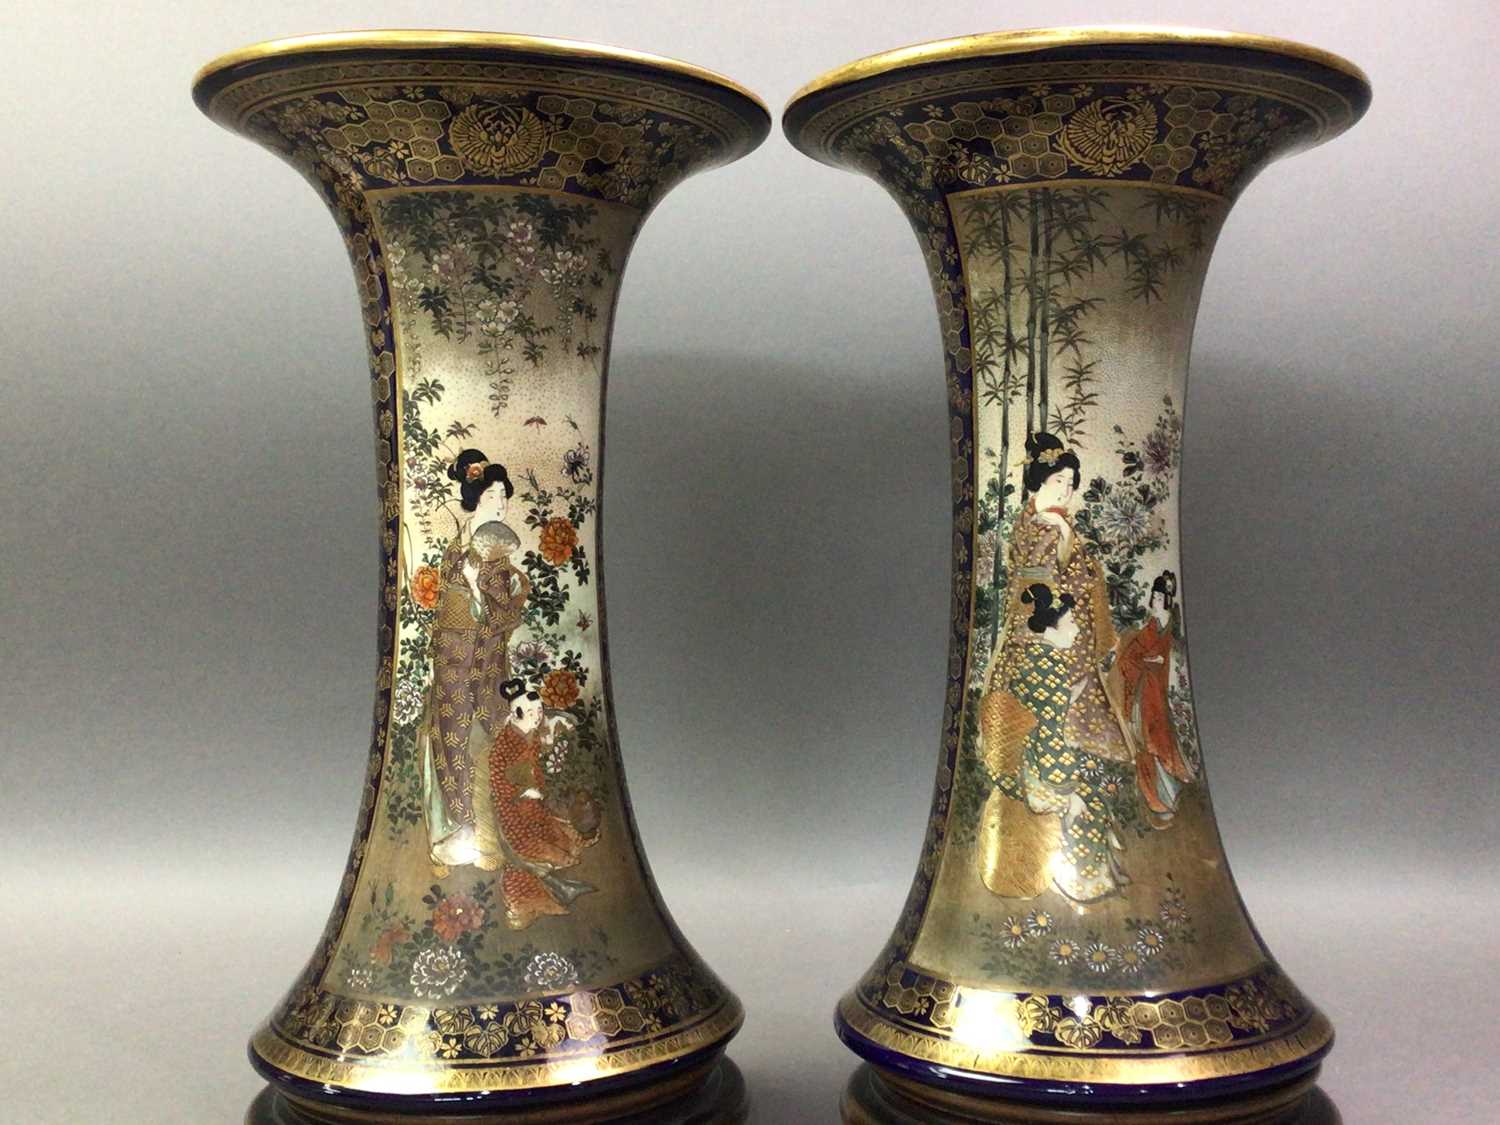 NEAR PAIR OF JAPANESE SATSUMA VASES LATE 19TH/EARLY 20TH CENTURY